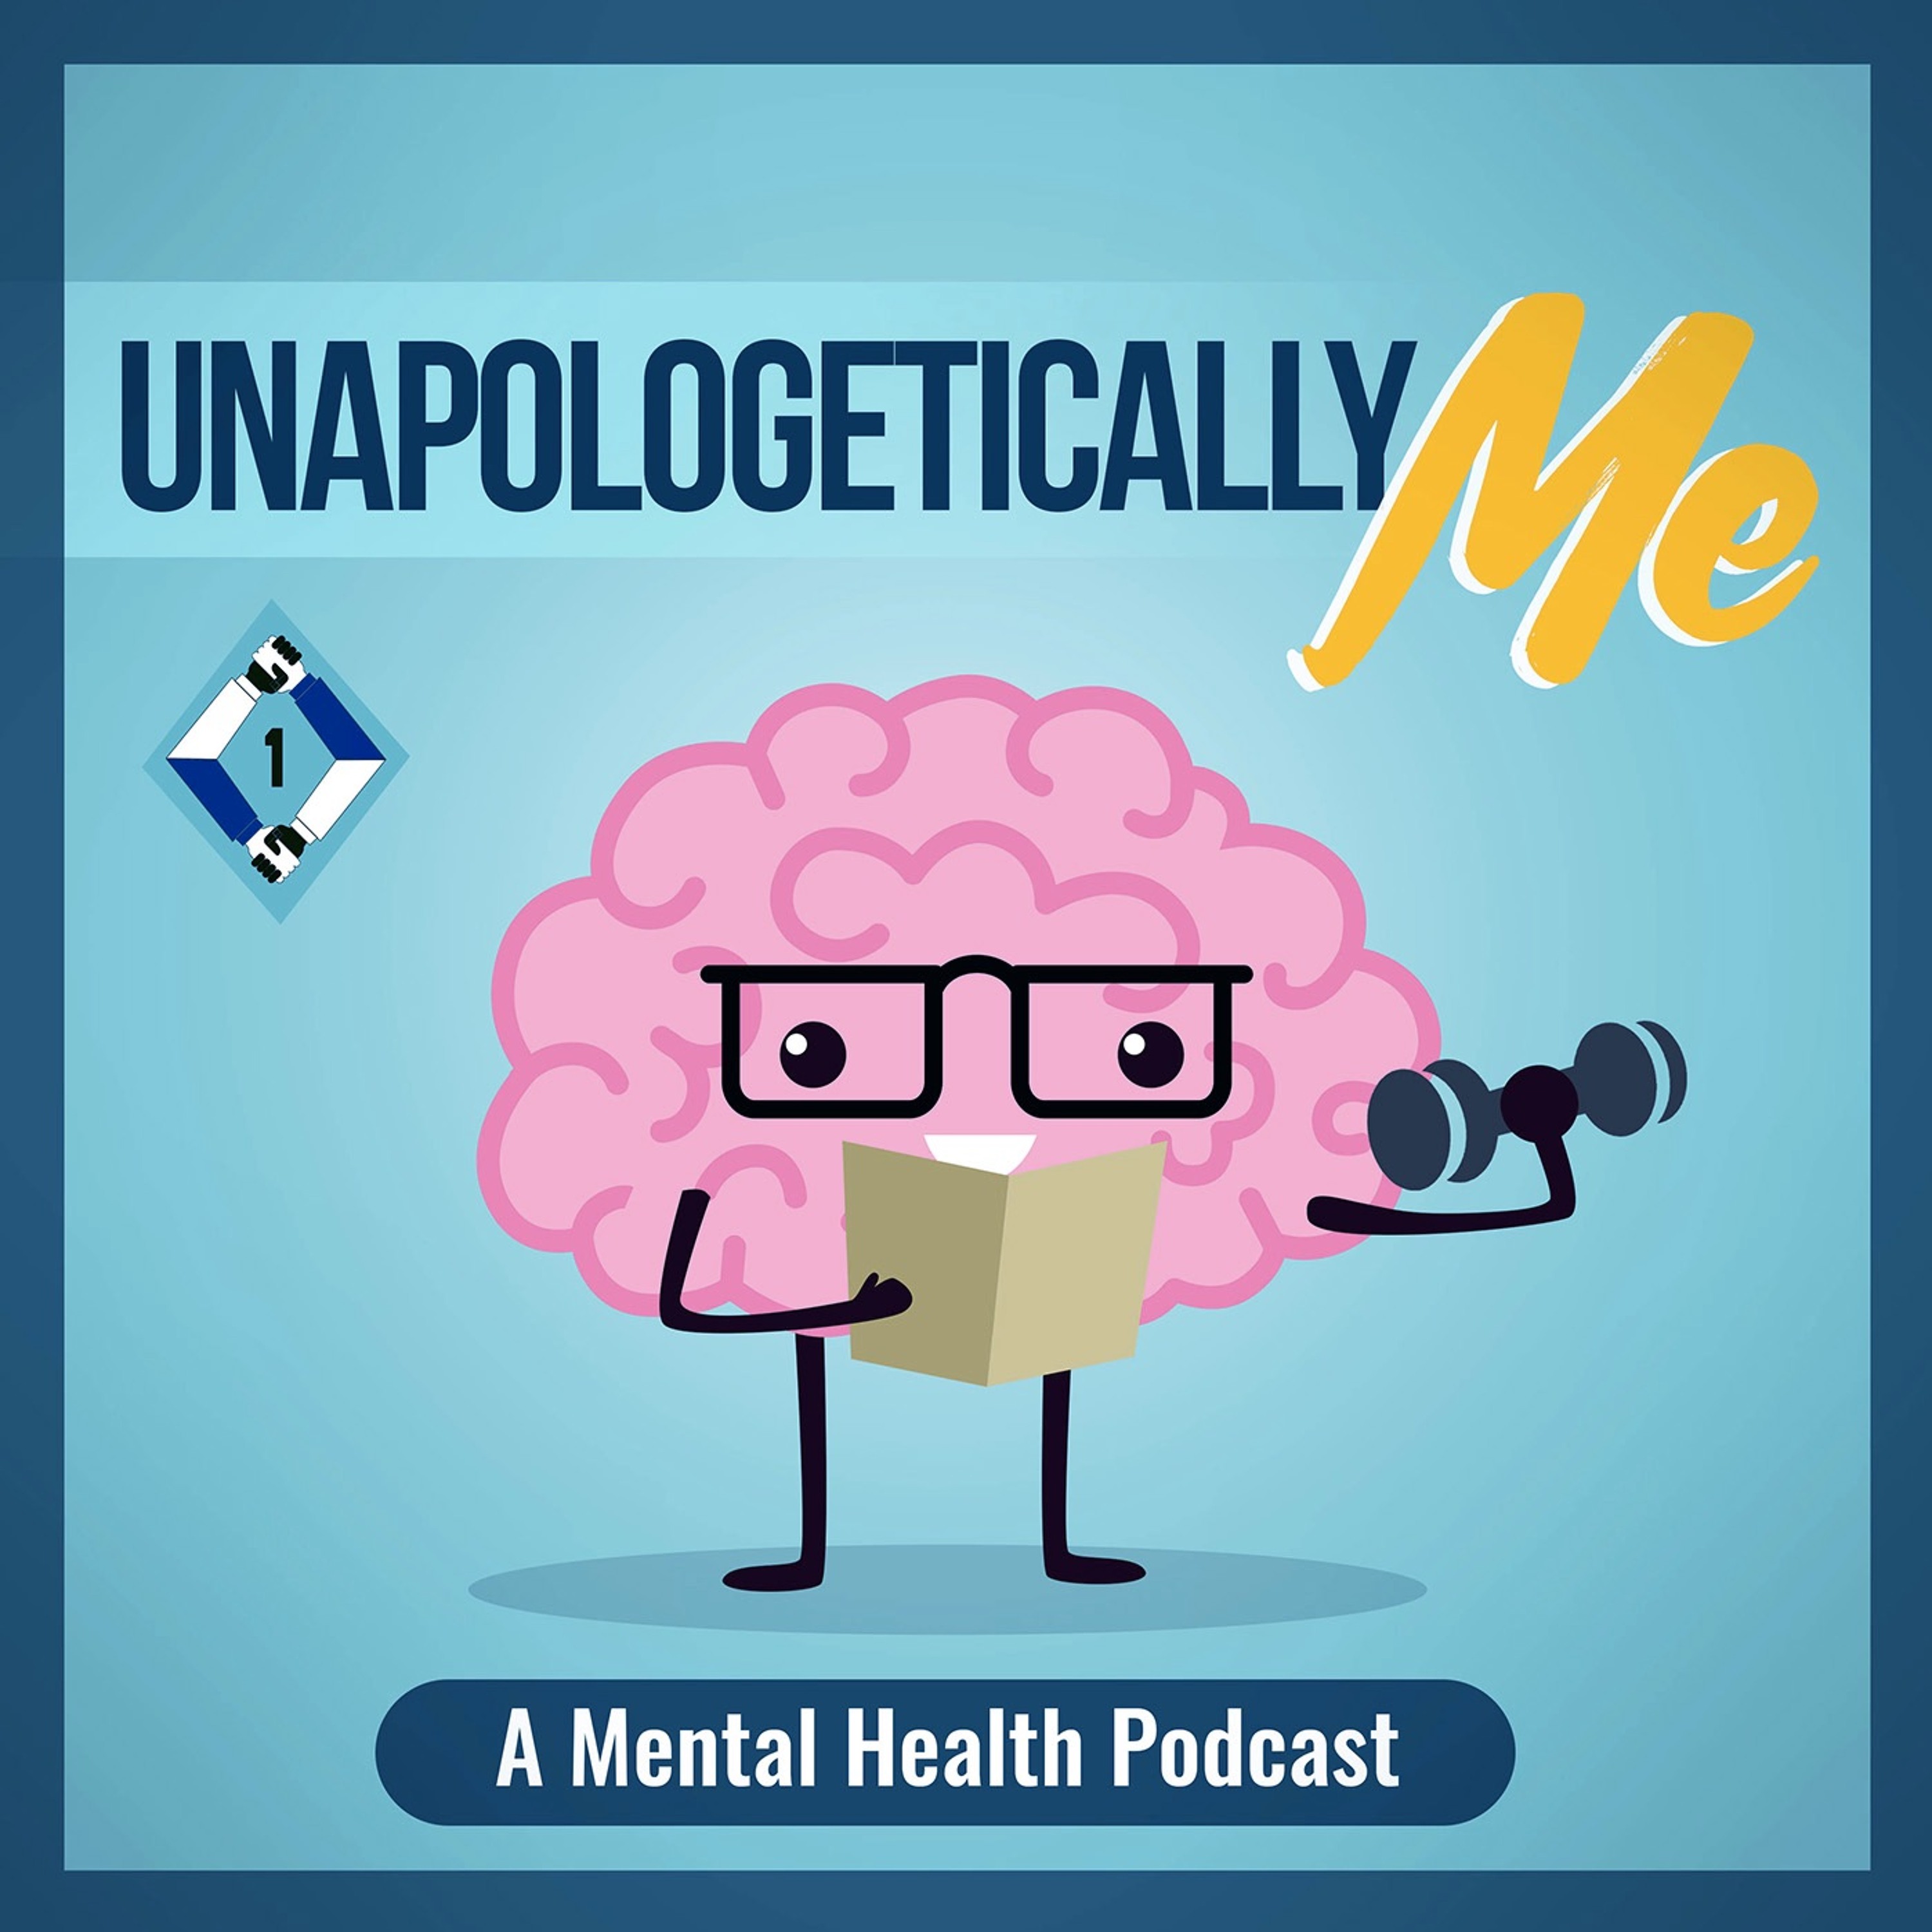 Unapologetically Me: A Mental Health Podcast - Health Tips Compilation #4